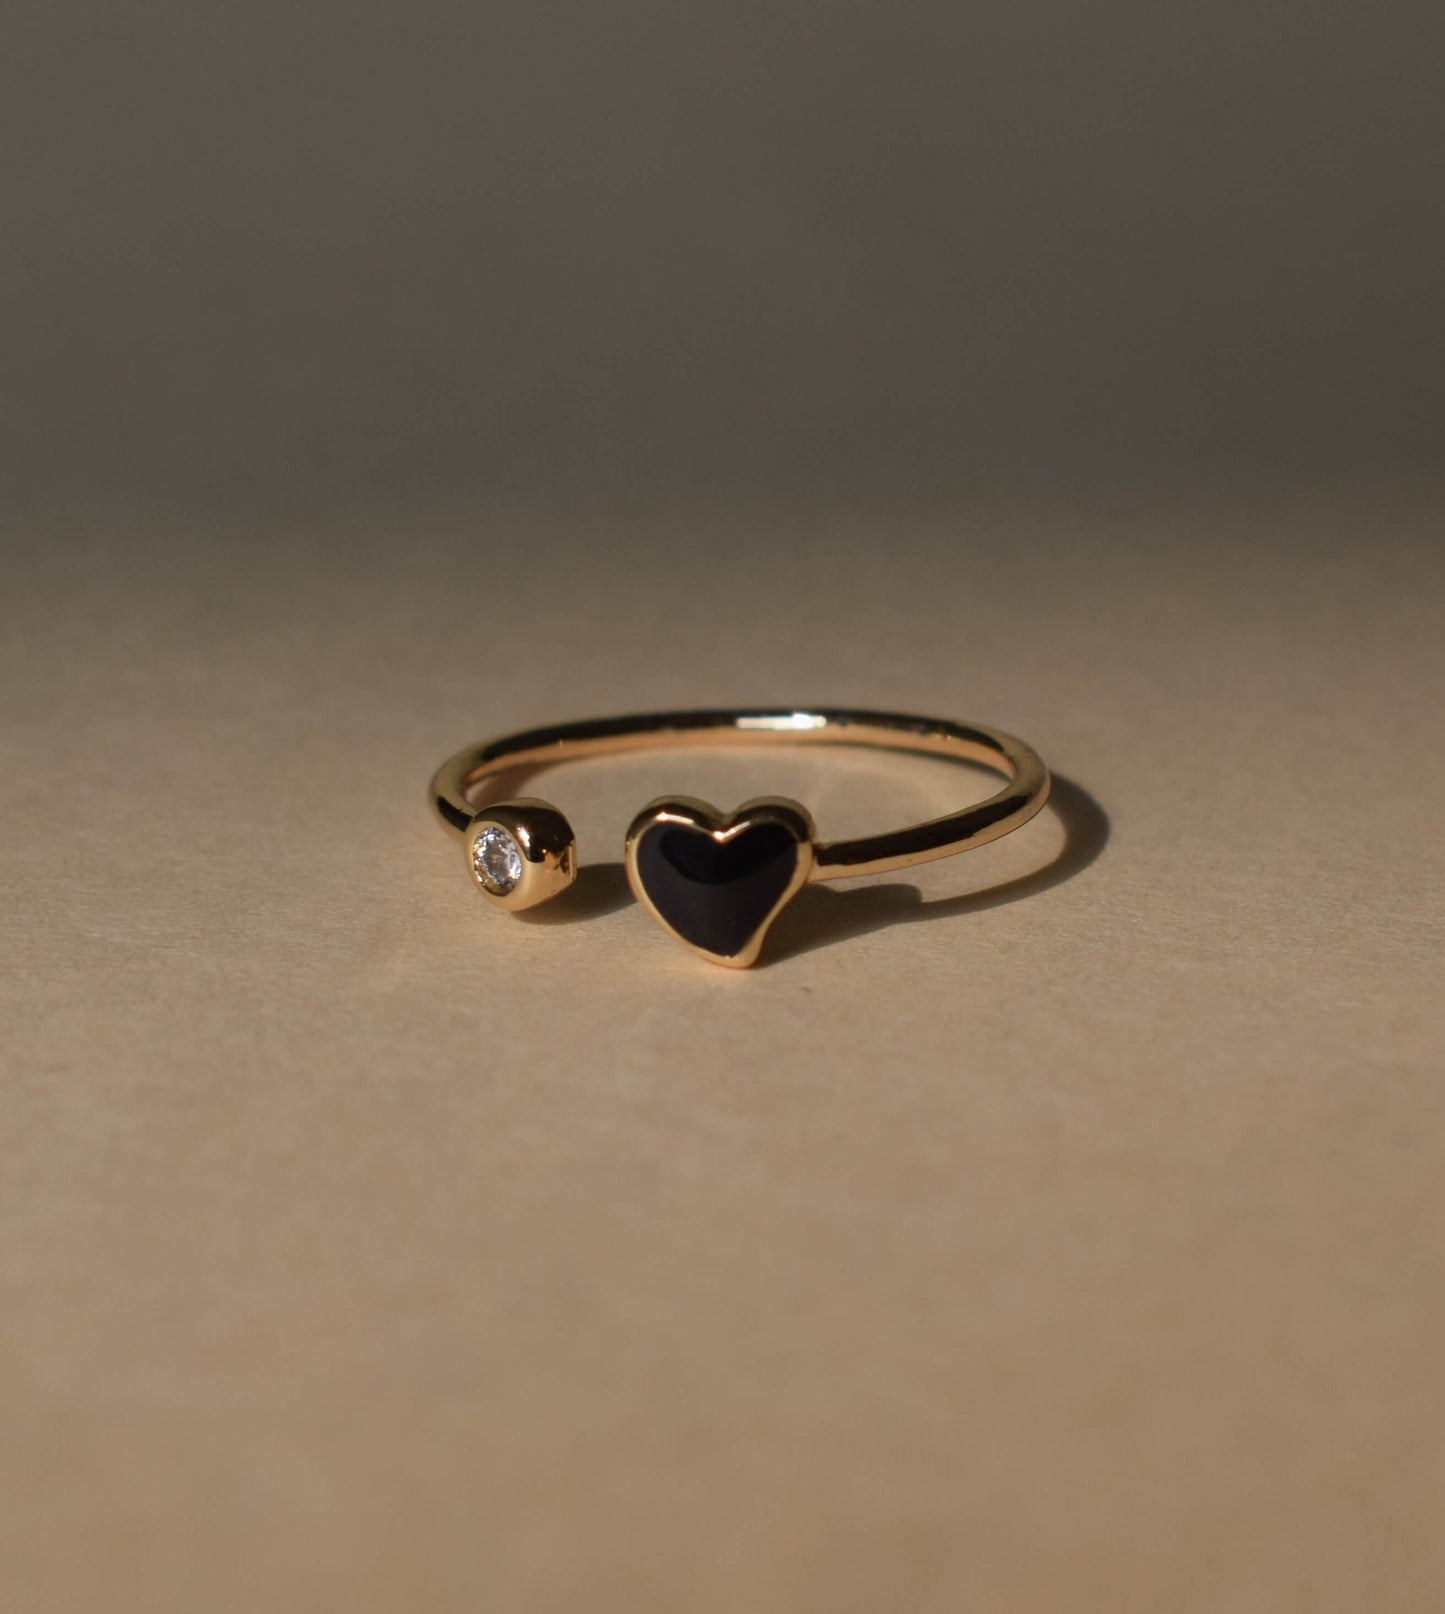 Heart-Shaped Ring for Women Free Size